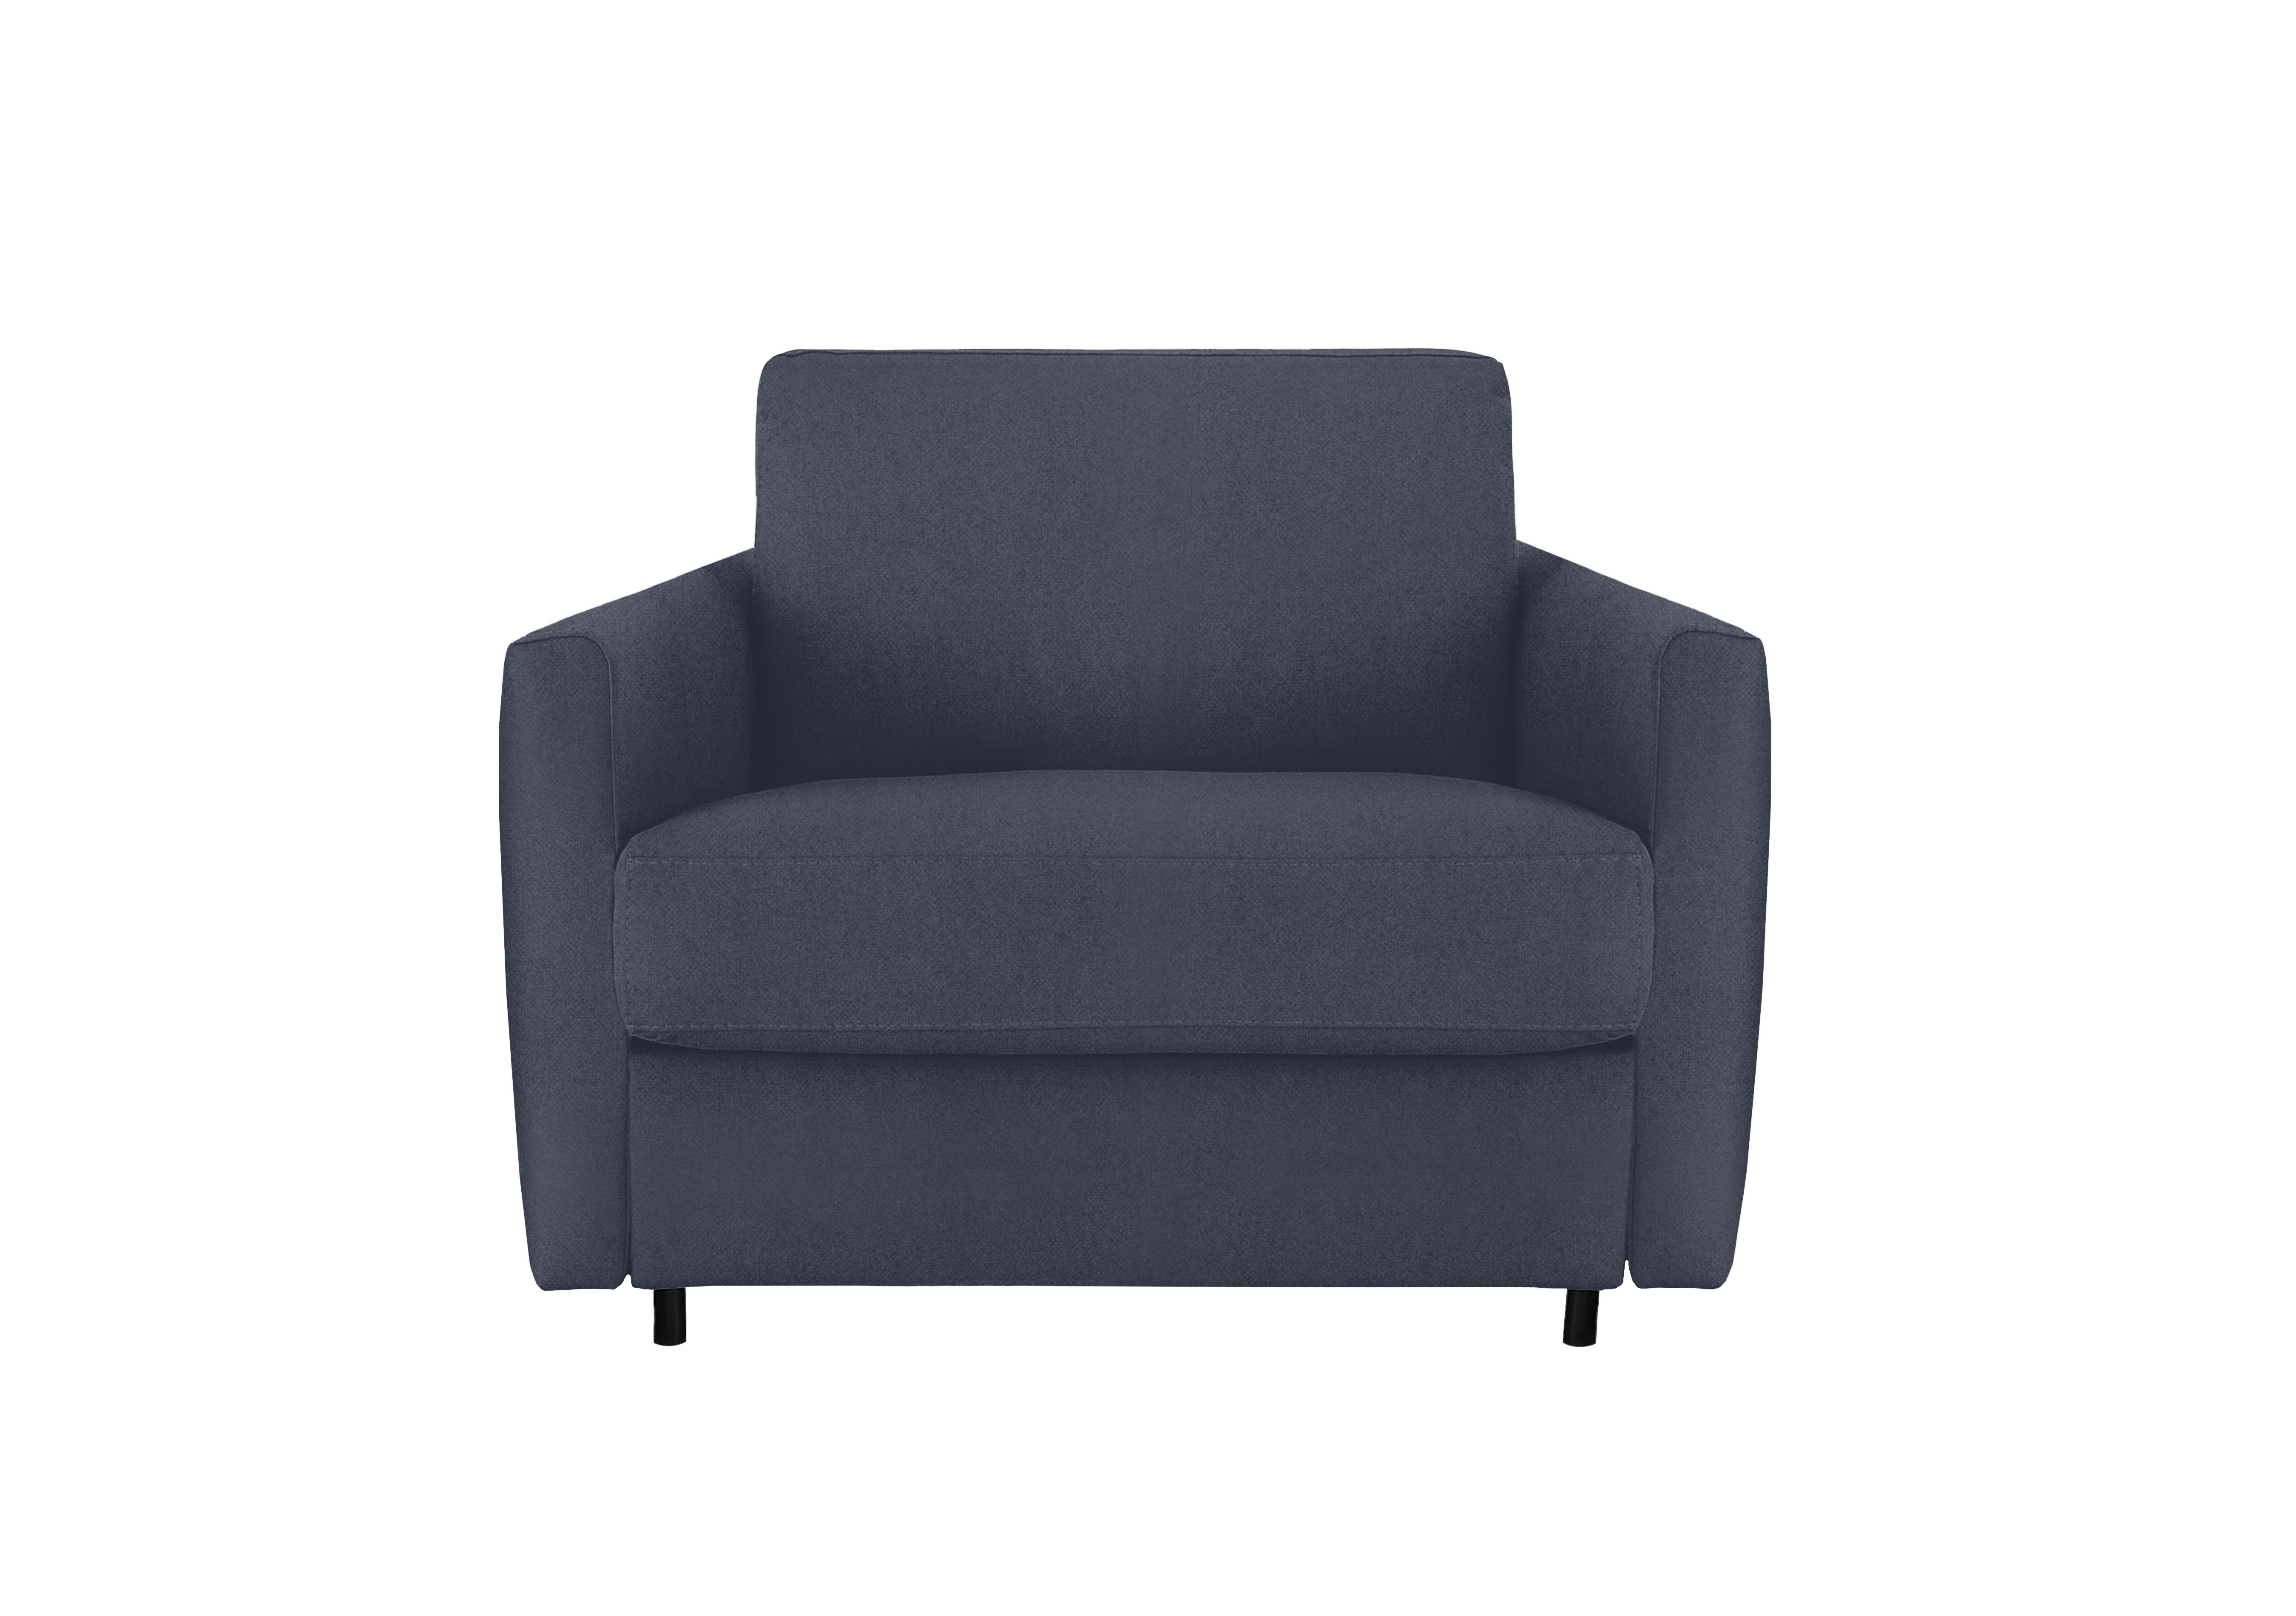 Alcova Fabric Chair Sofa Bed with Slim Arms in Fuente Ocean on Furniture Village